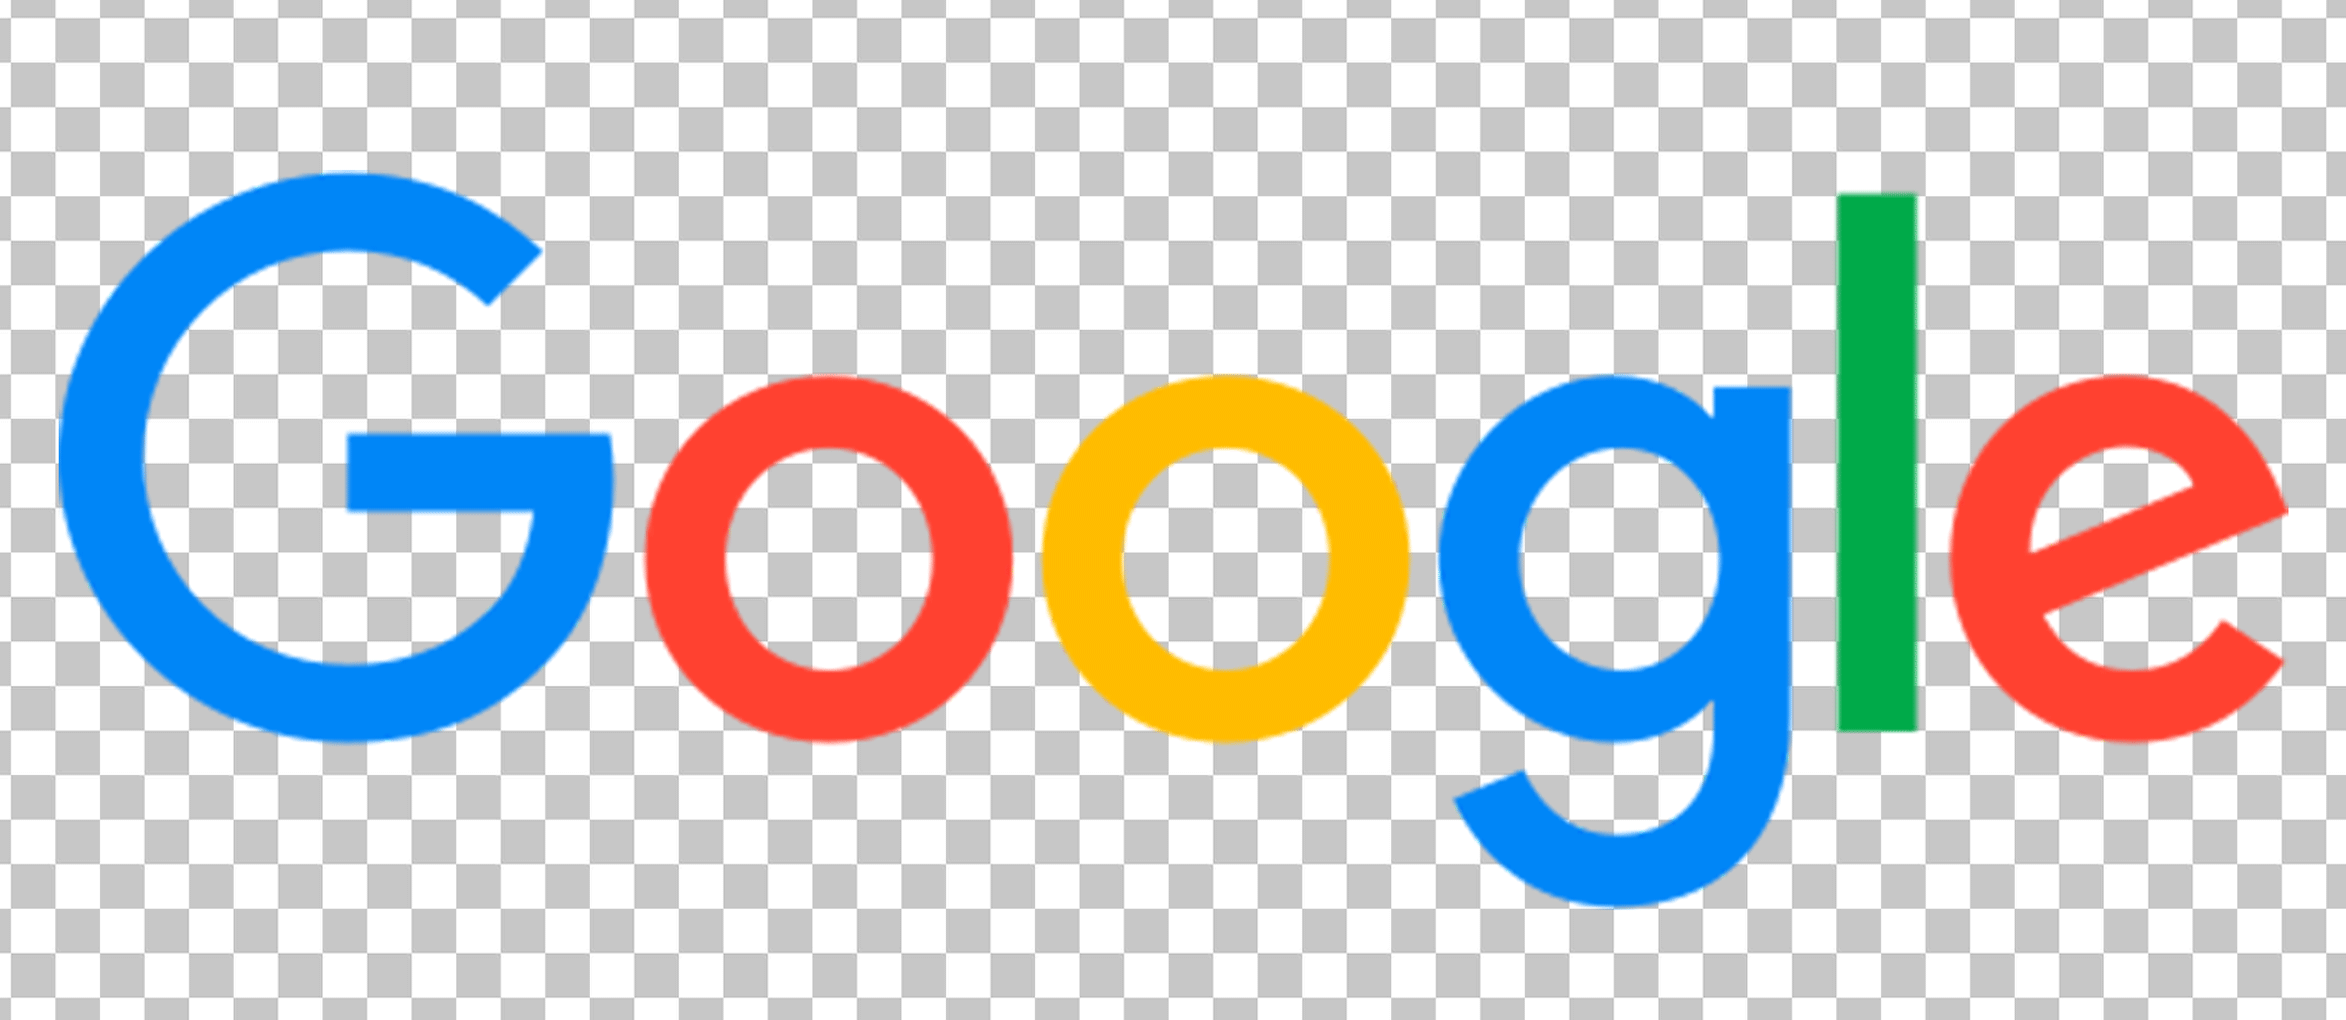 Google search engine logo, blue, red, yellow, green